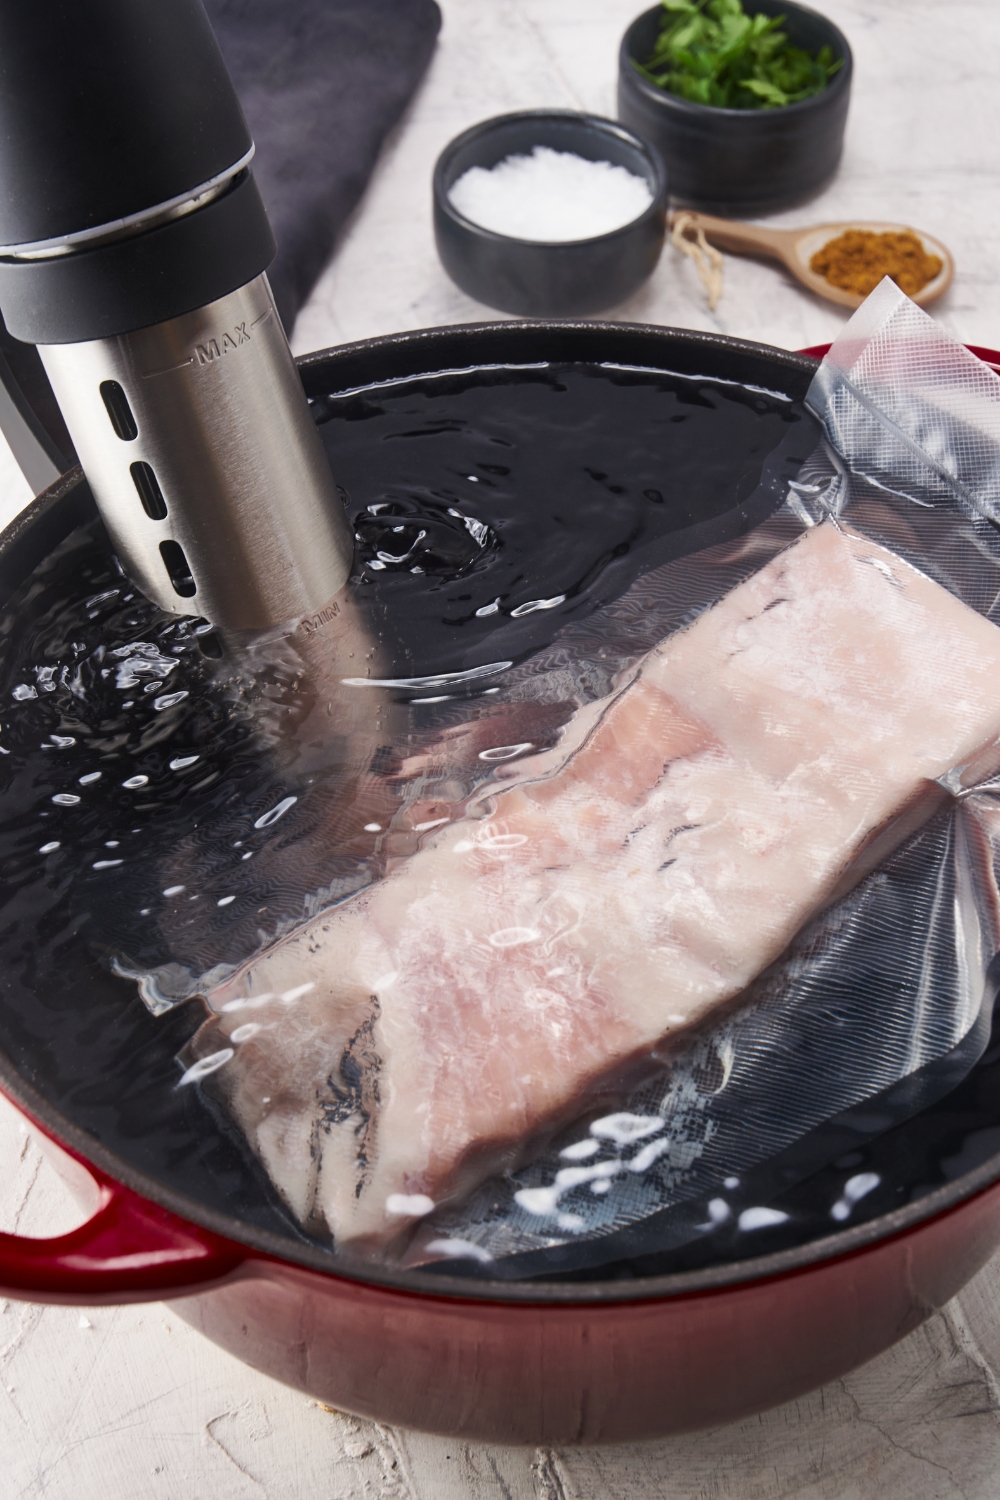 Pork belly in a vacuum sealed bag being cooked in a sous vide water bath.